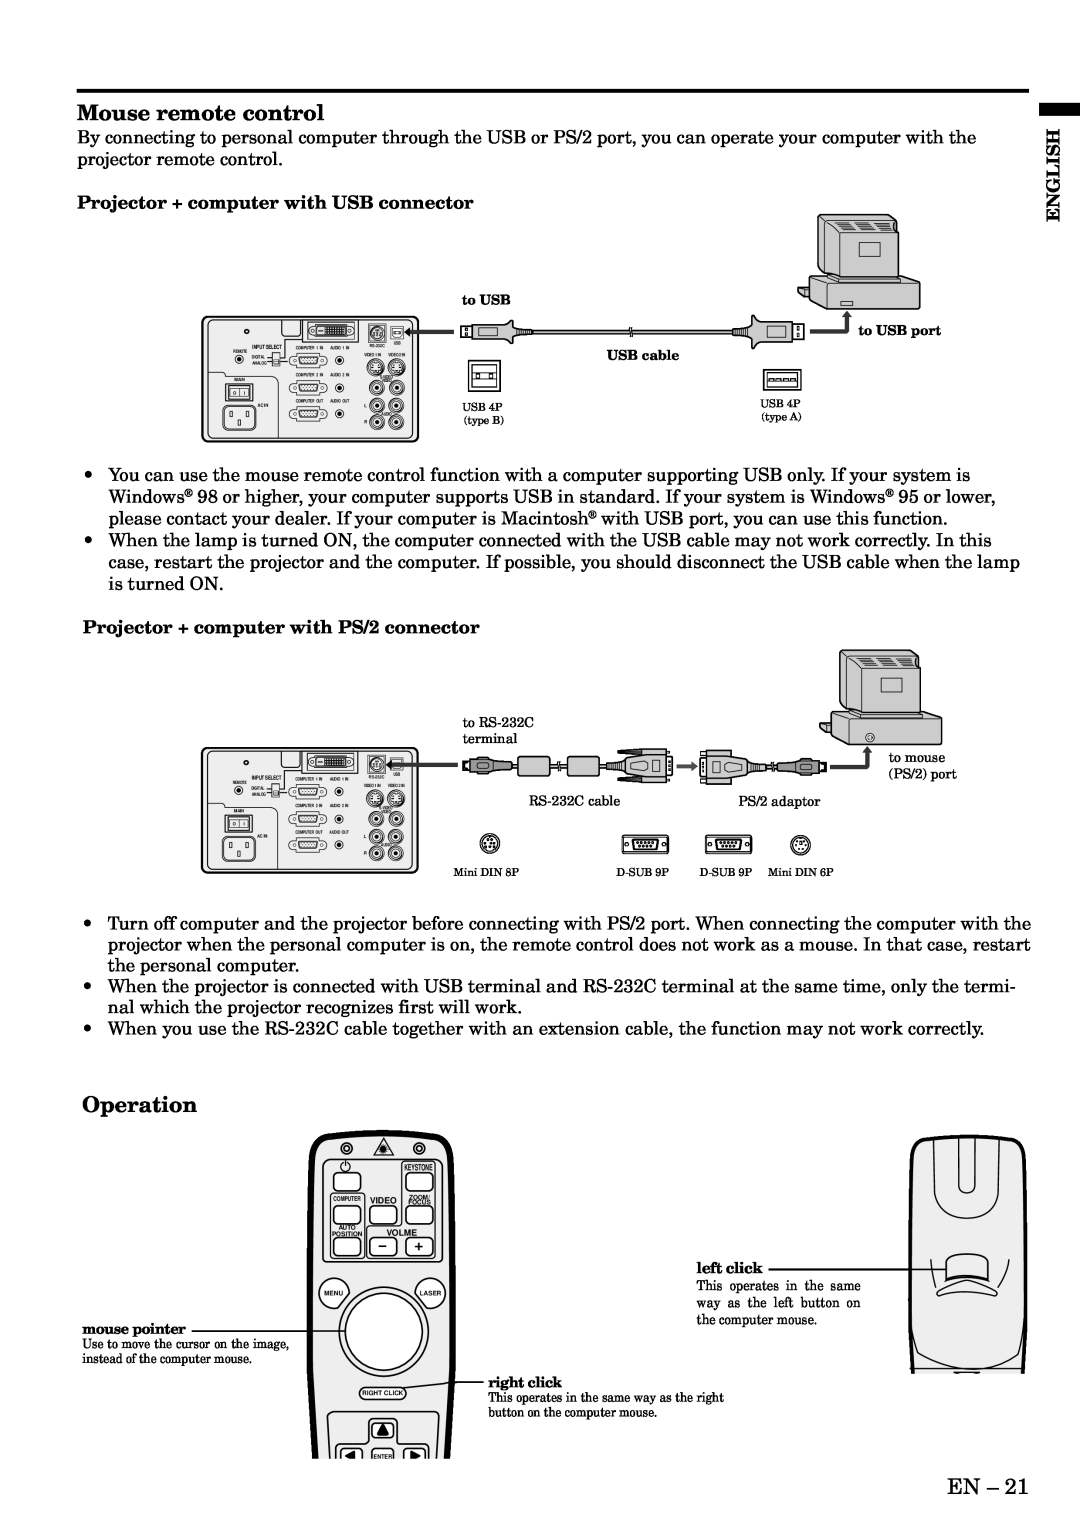 Mitsubishi Electronics X500U user manual Mouse remote control, Operation, Projector + computer with USB connector, English 